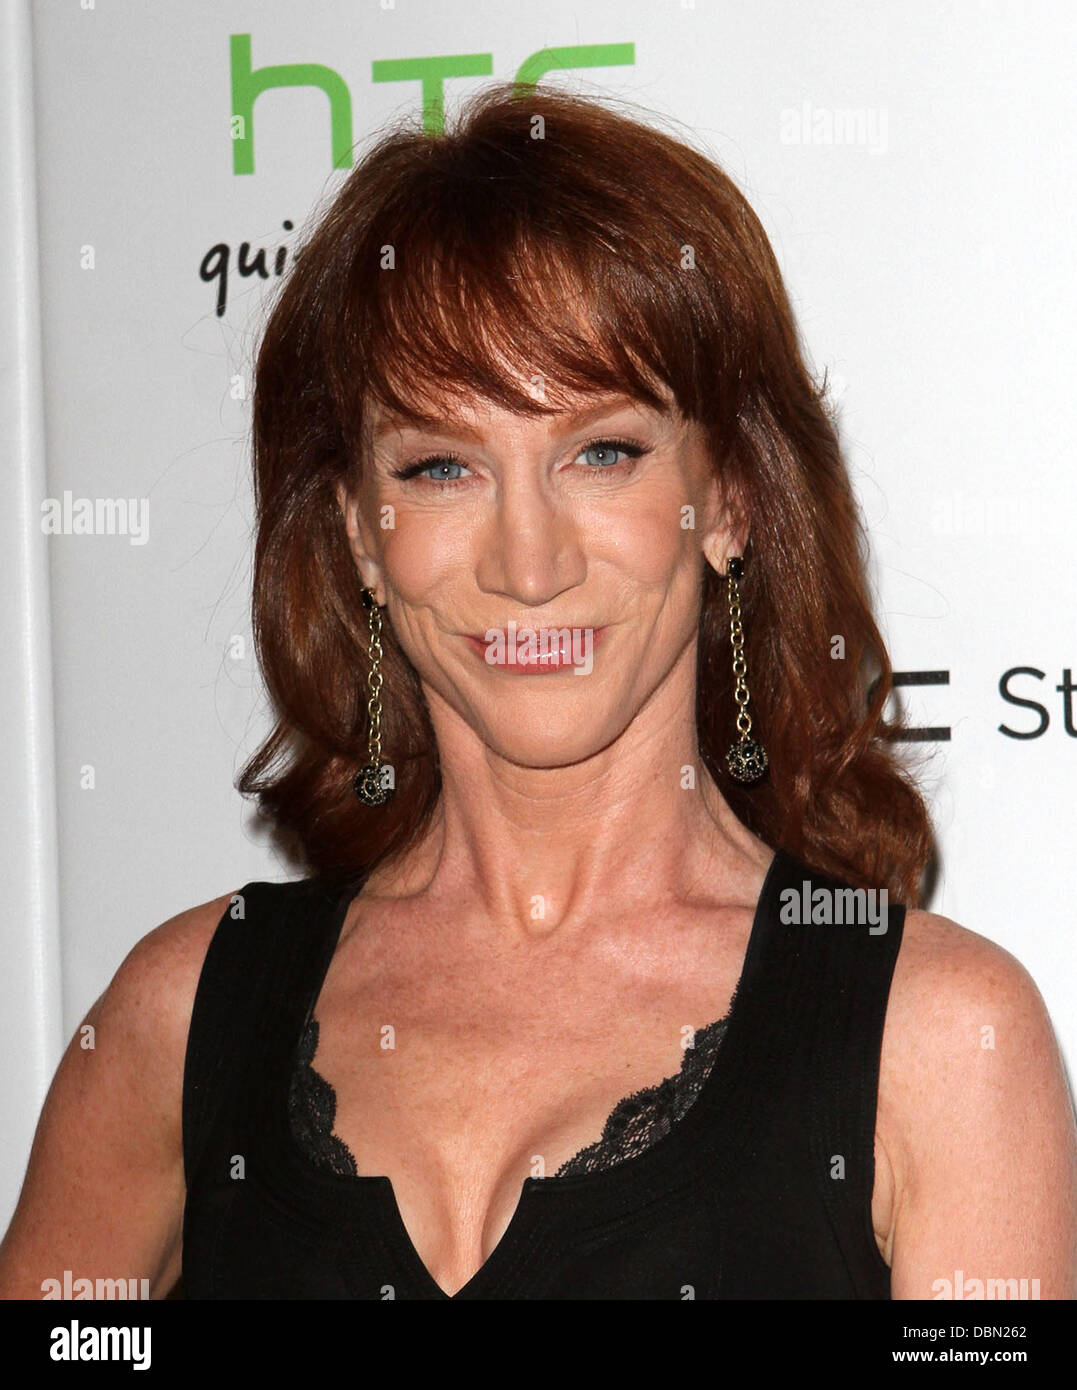 Kathy Griffin The HTC Status Social launch event held at Paramount Studios - Arrivals Los Angeles, California - 19.07.11 Stock Photo